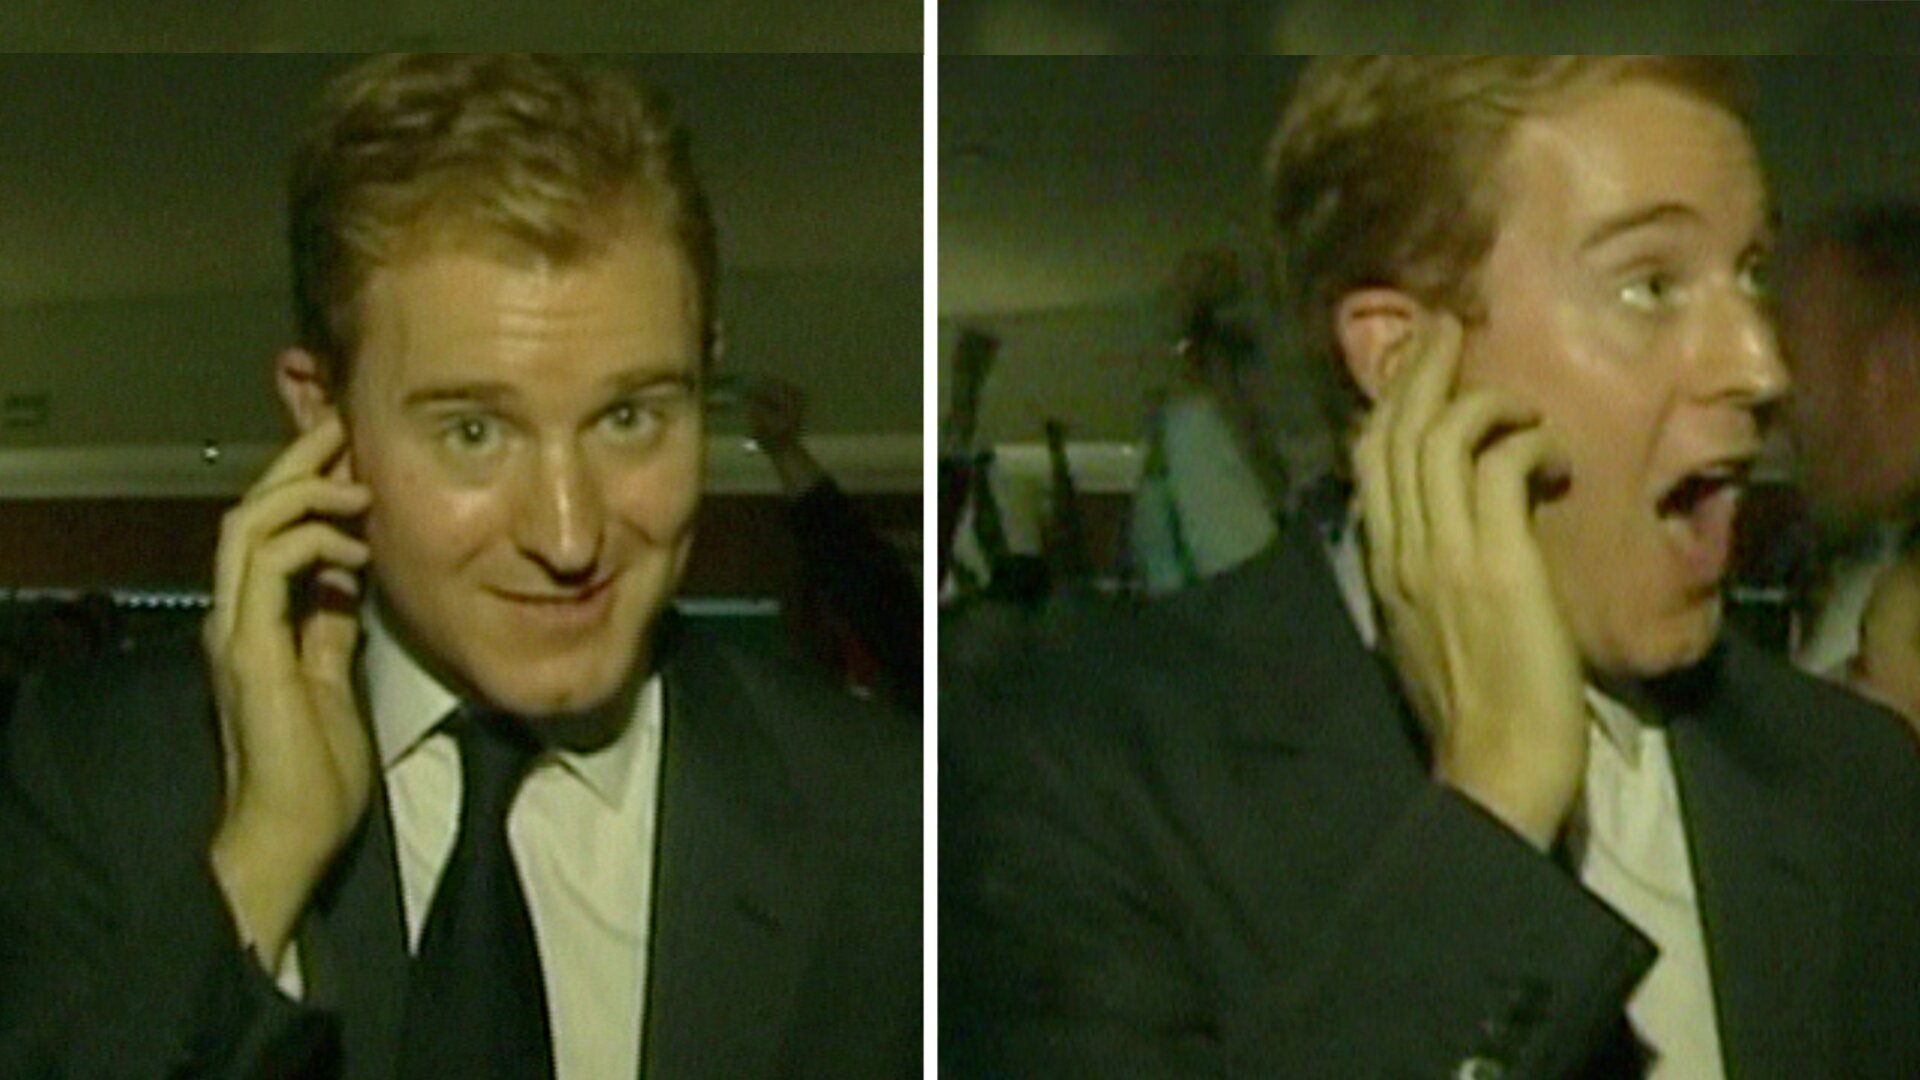 Never before seen footage of England fans reacting to the 2003 World Cup final is going viral